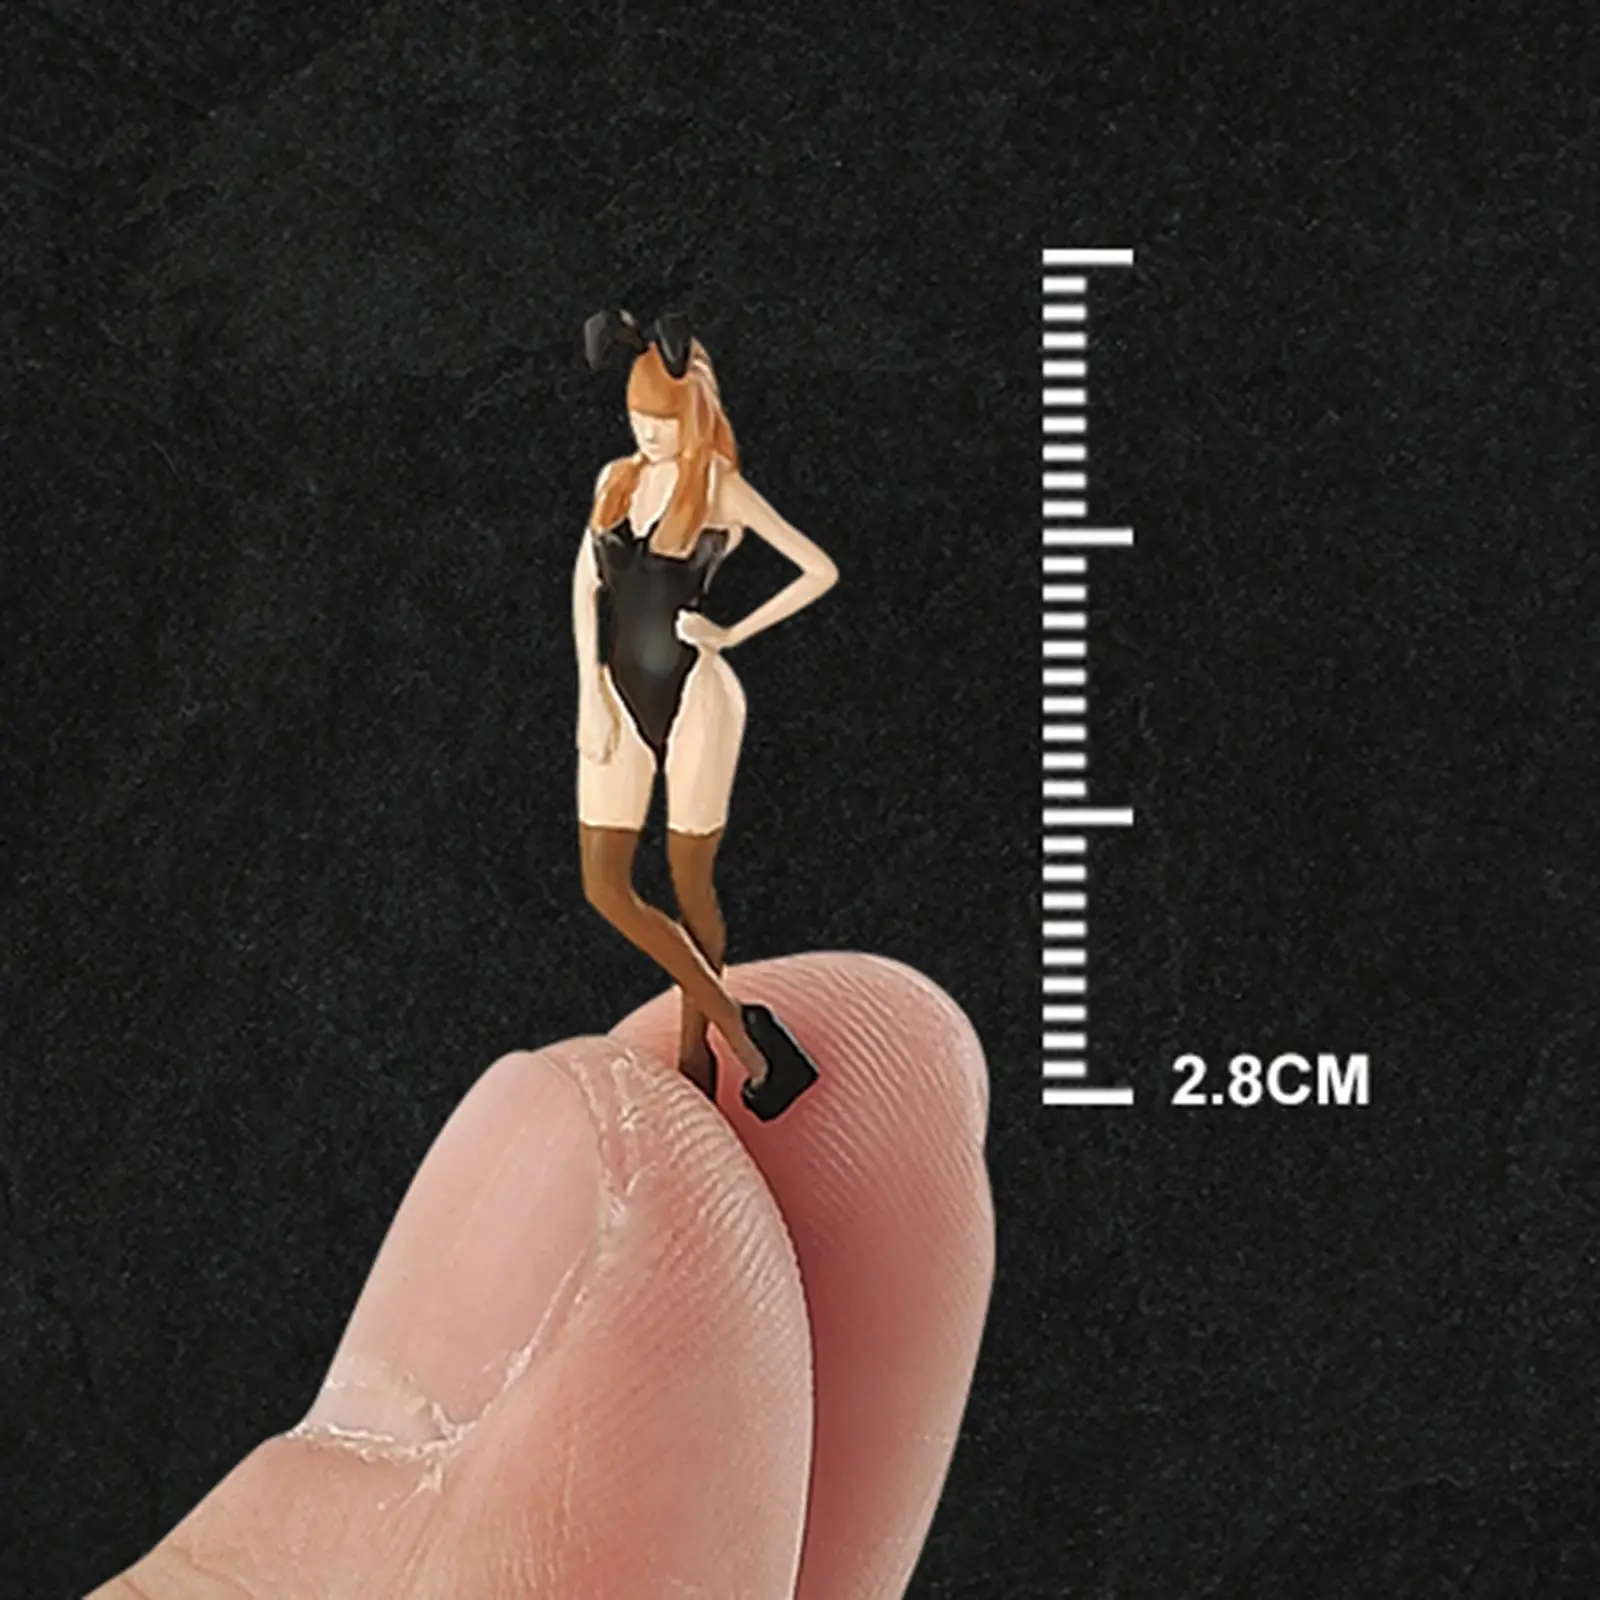 Realistic 1:64 Girls Figures Desk Decoration Tiny People Model for Dollhouse Micro Landscapes